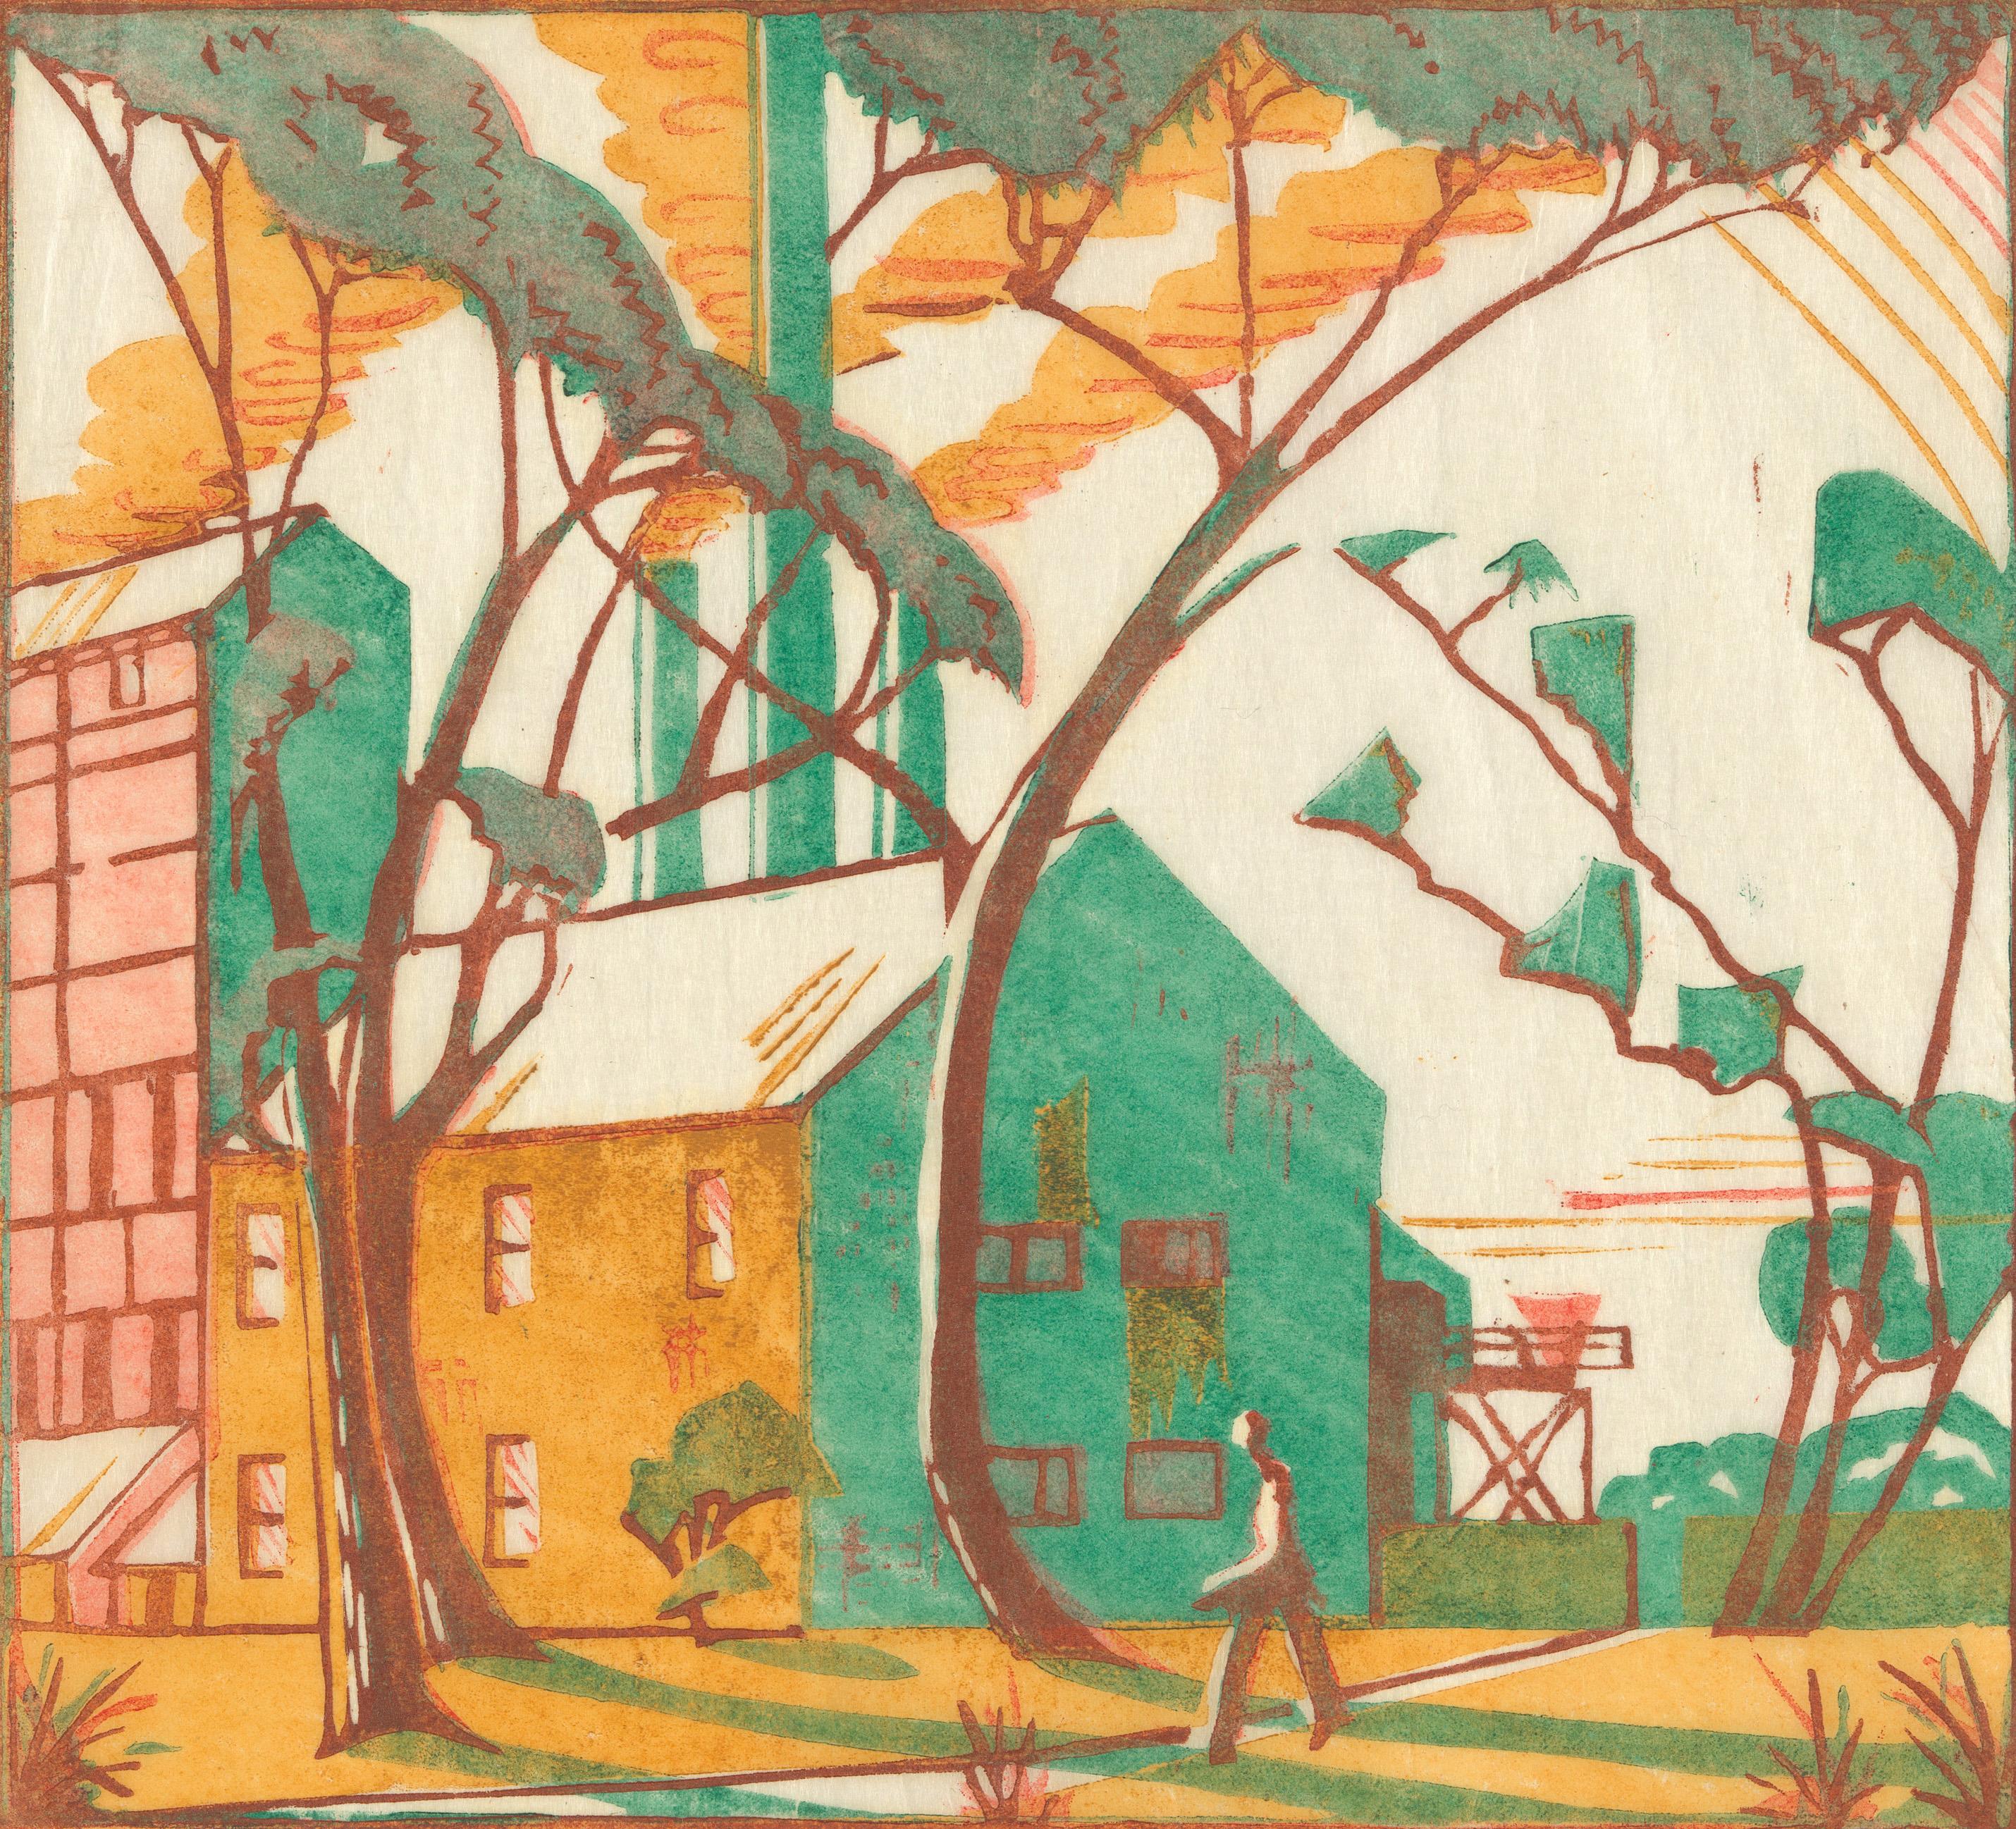 Eveline Syme, The factory, 1933, colour linocut, National Gallery of Australia, Kamberri/Canberra, purchased 1979, © Estate of Eveline Syme